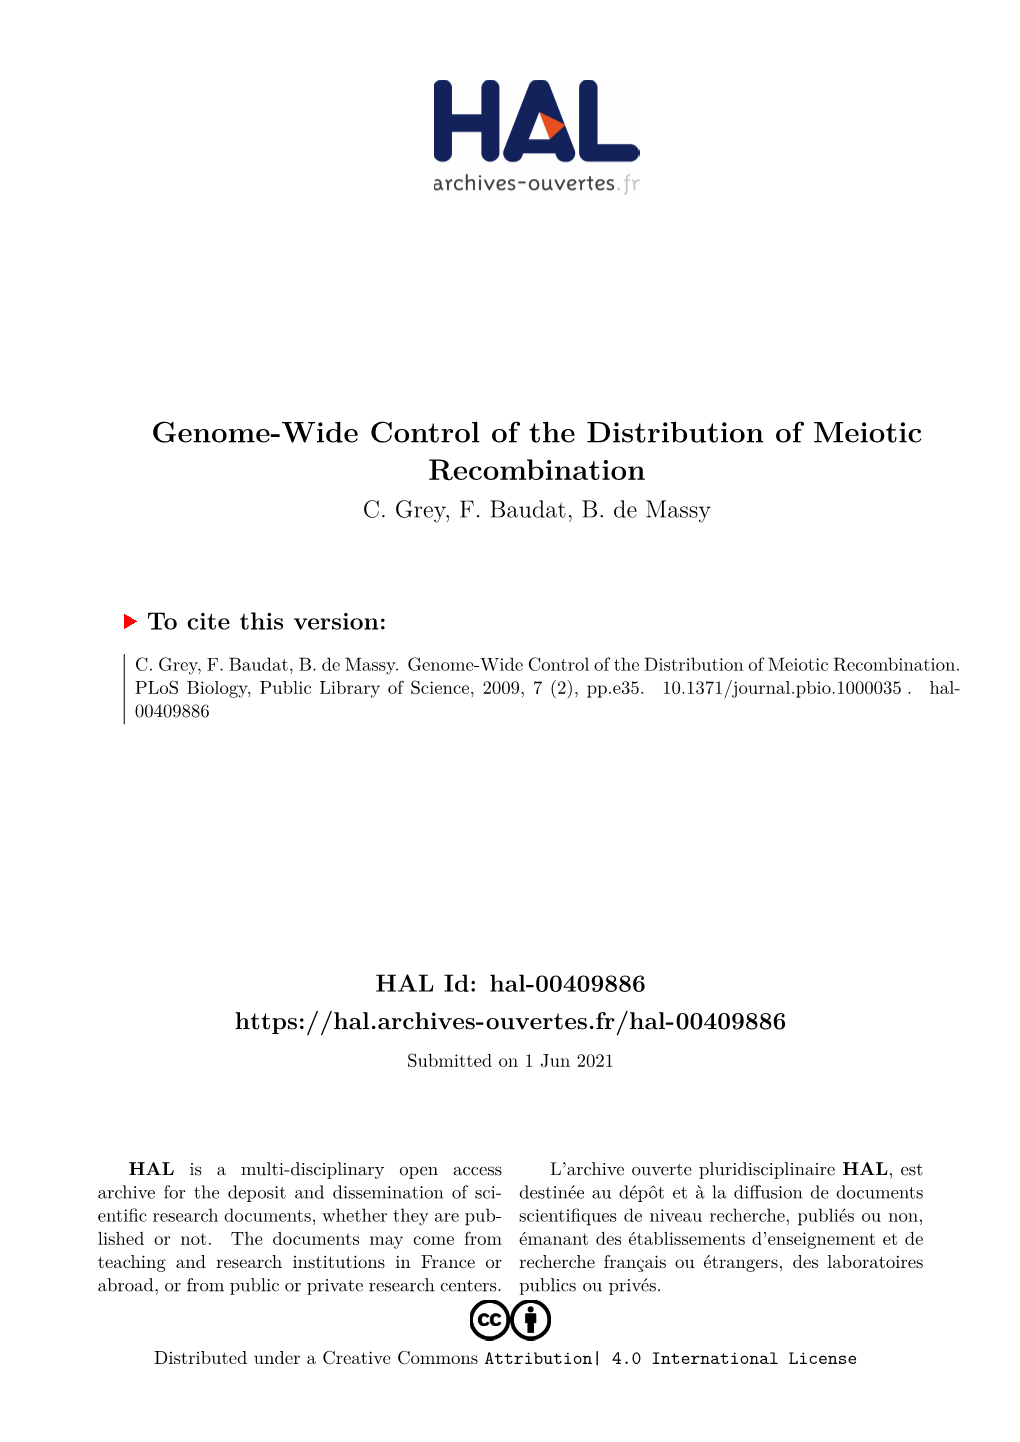 Genome-Wide Control of the Distribution of Meiotic Recombination C